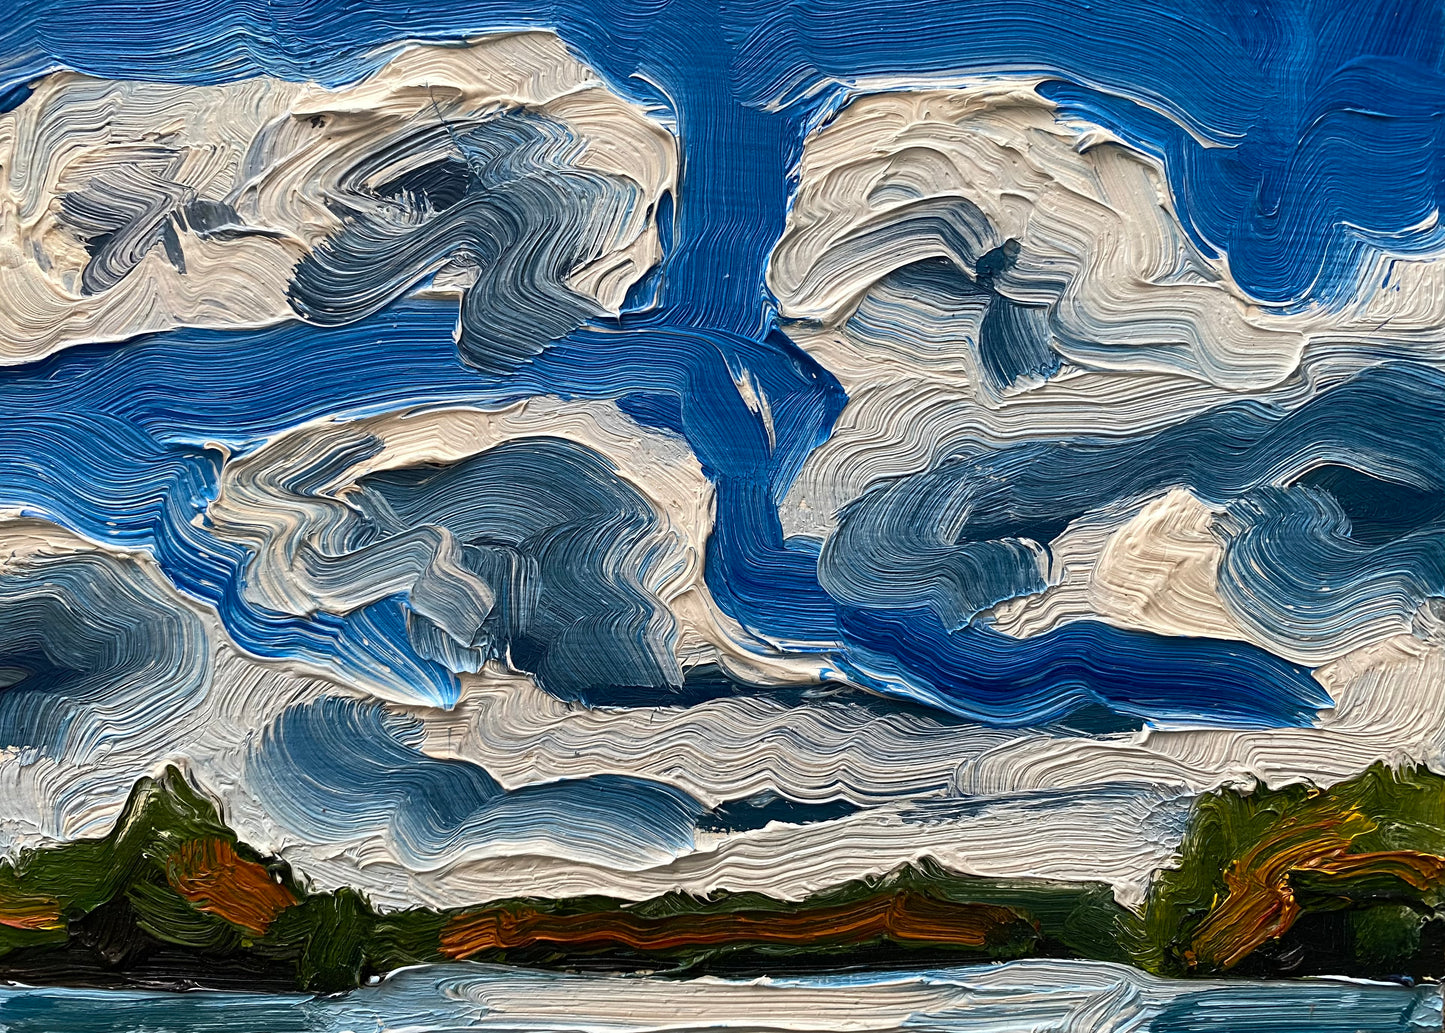 Swirling Clouds